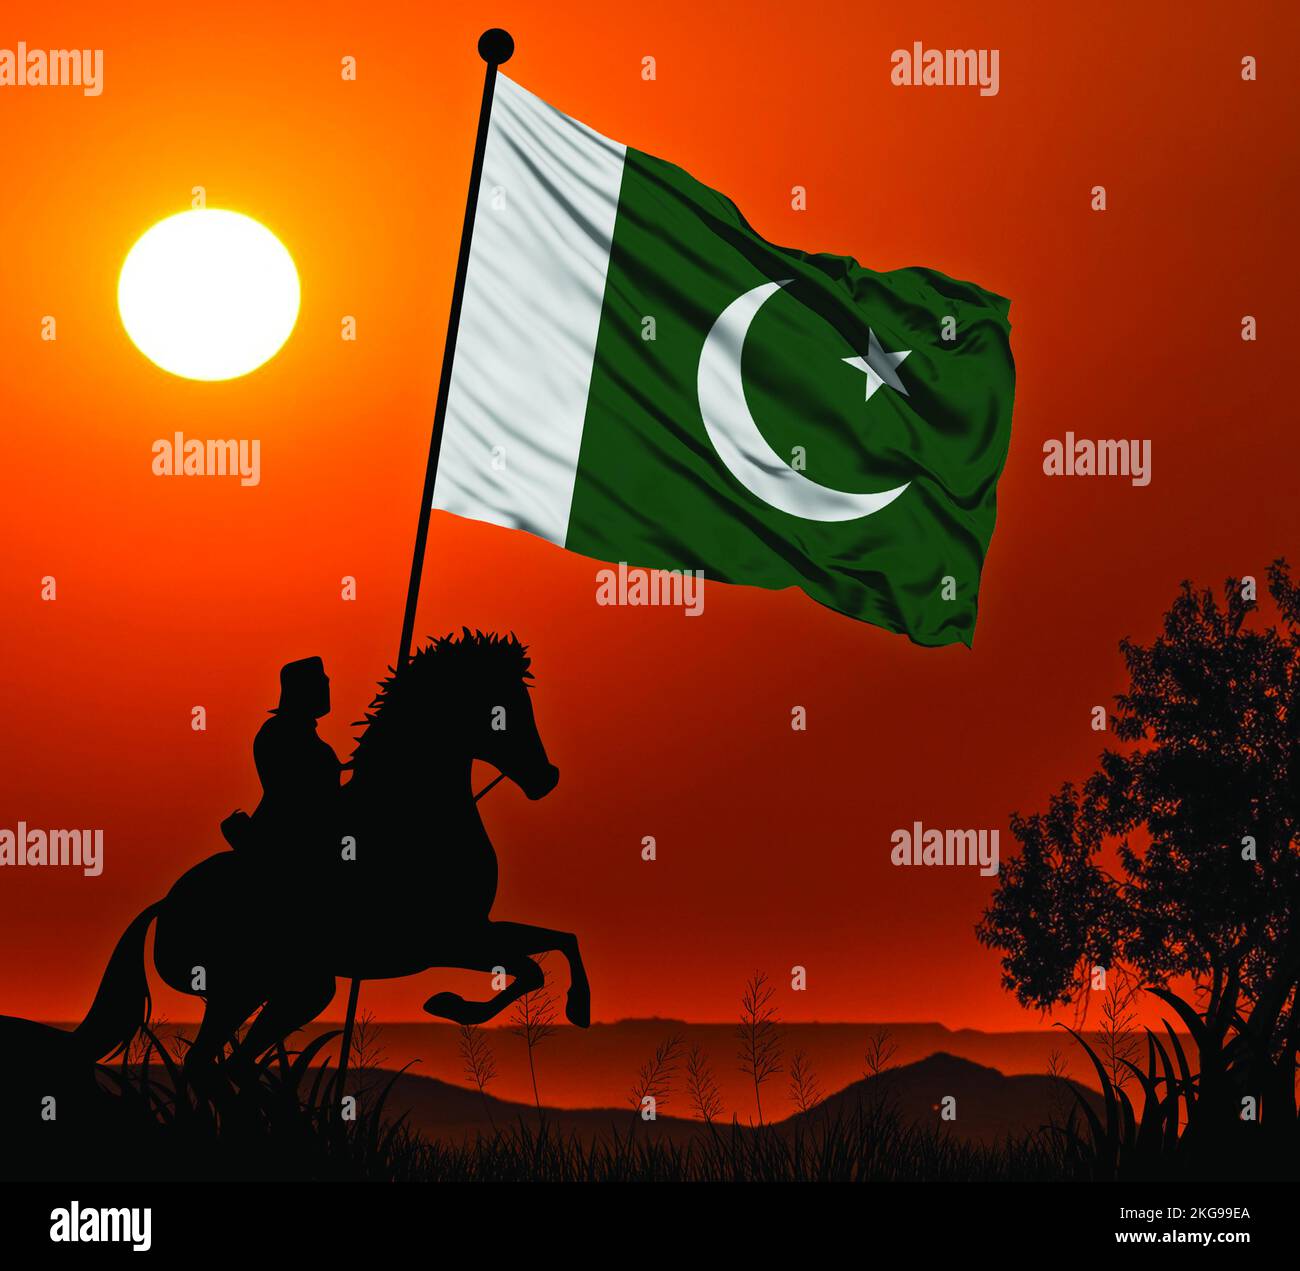 Pakistan National Flag 3d Rendering for Pakistan National Days, Defence day, Independence day Stock Photo